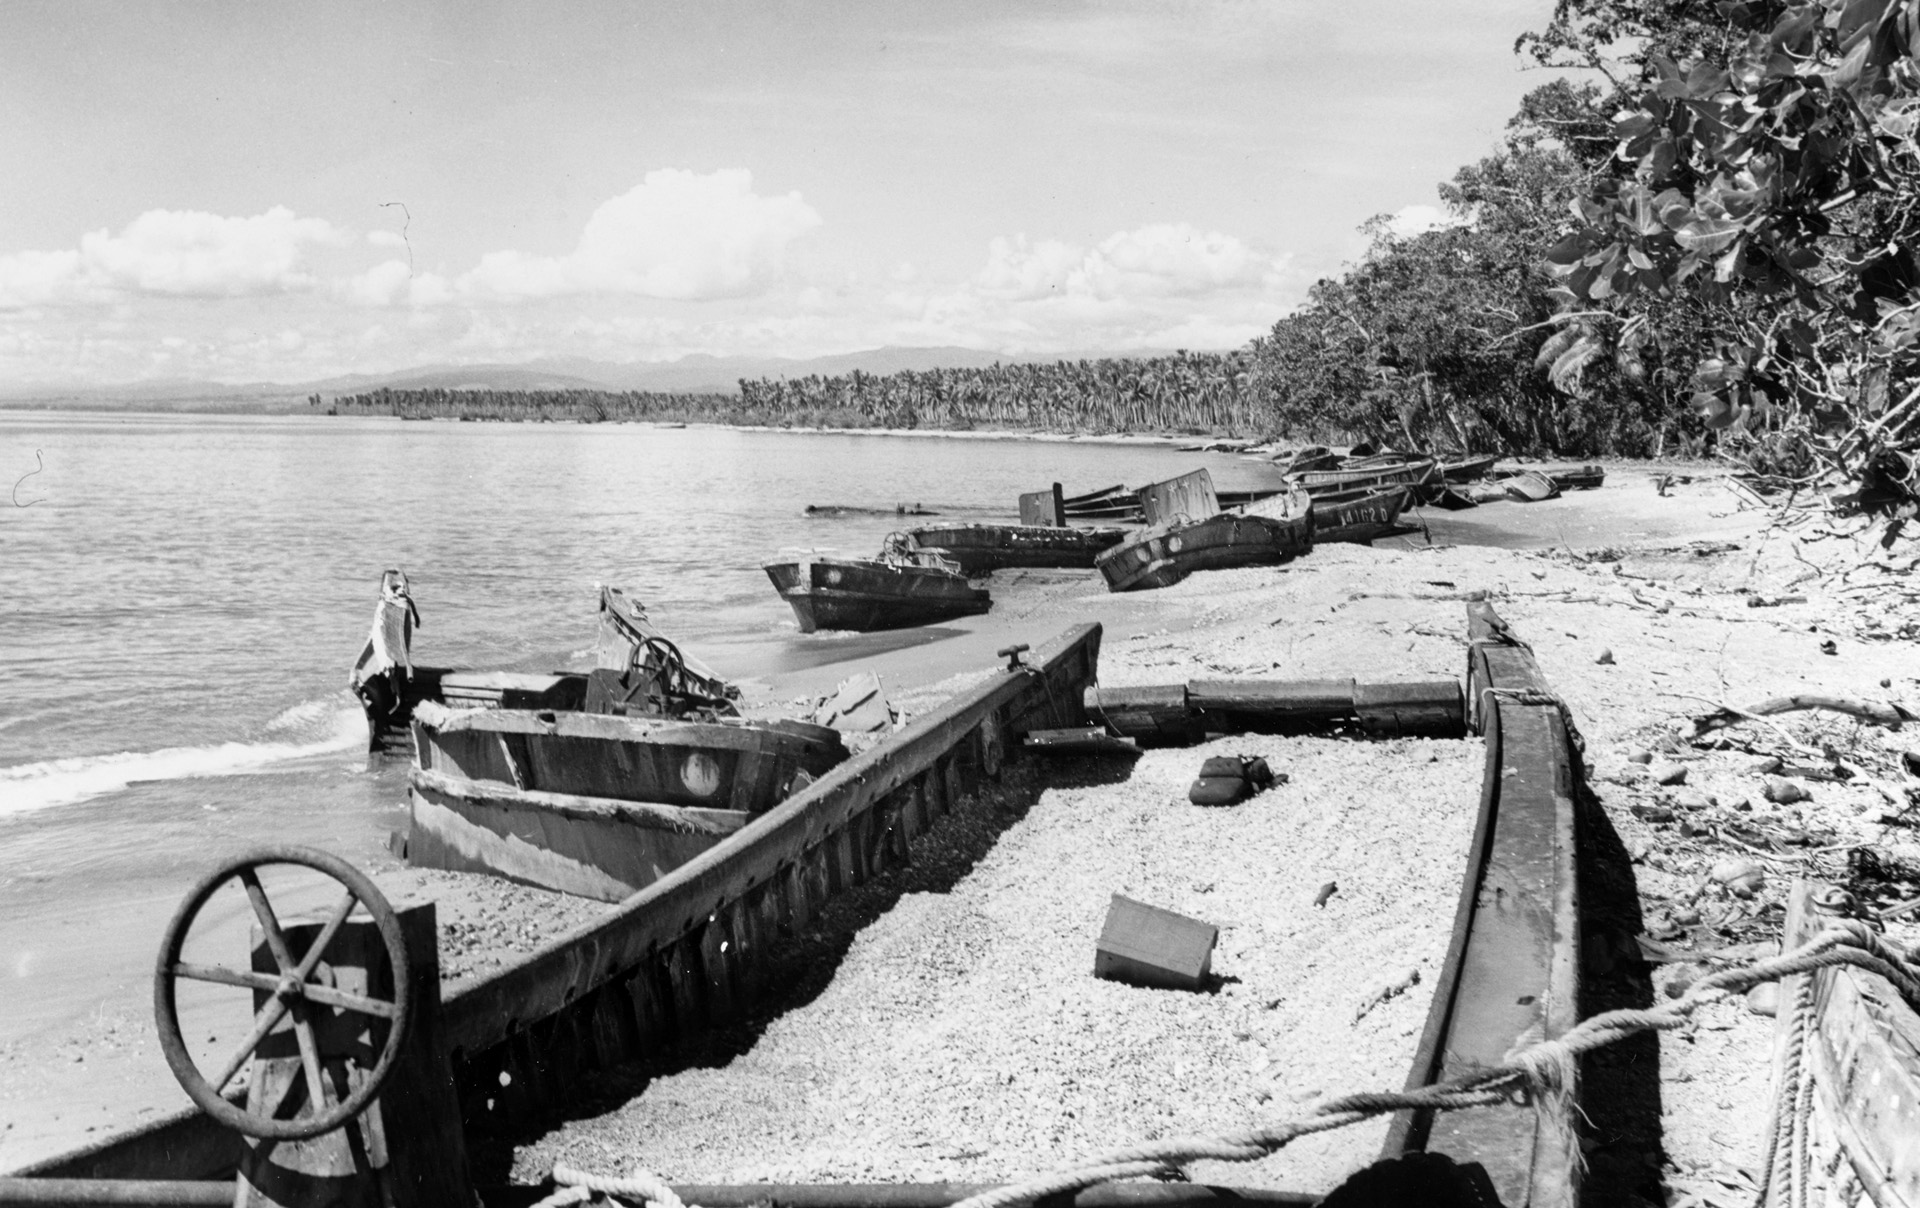 The end of the Guadalcanal campaign came on February 9, 1943, when there were no more enemy troops left to fight. Here, wrecked Japanese landing barges, photographed in May 1942, lie abandoned near Cape Esperance at Guadalcanal’s northern point. 